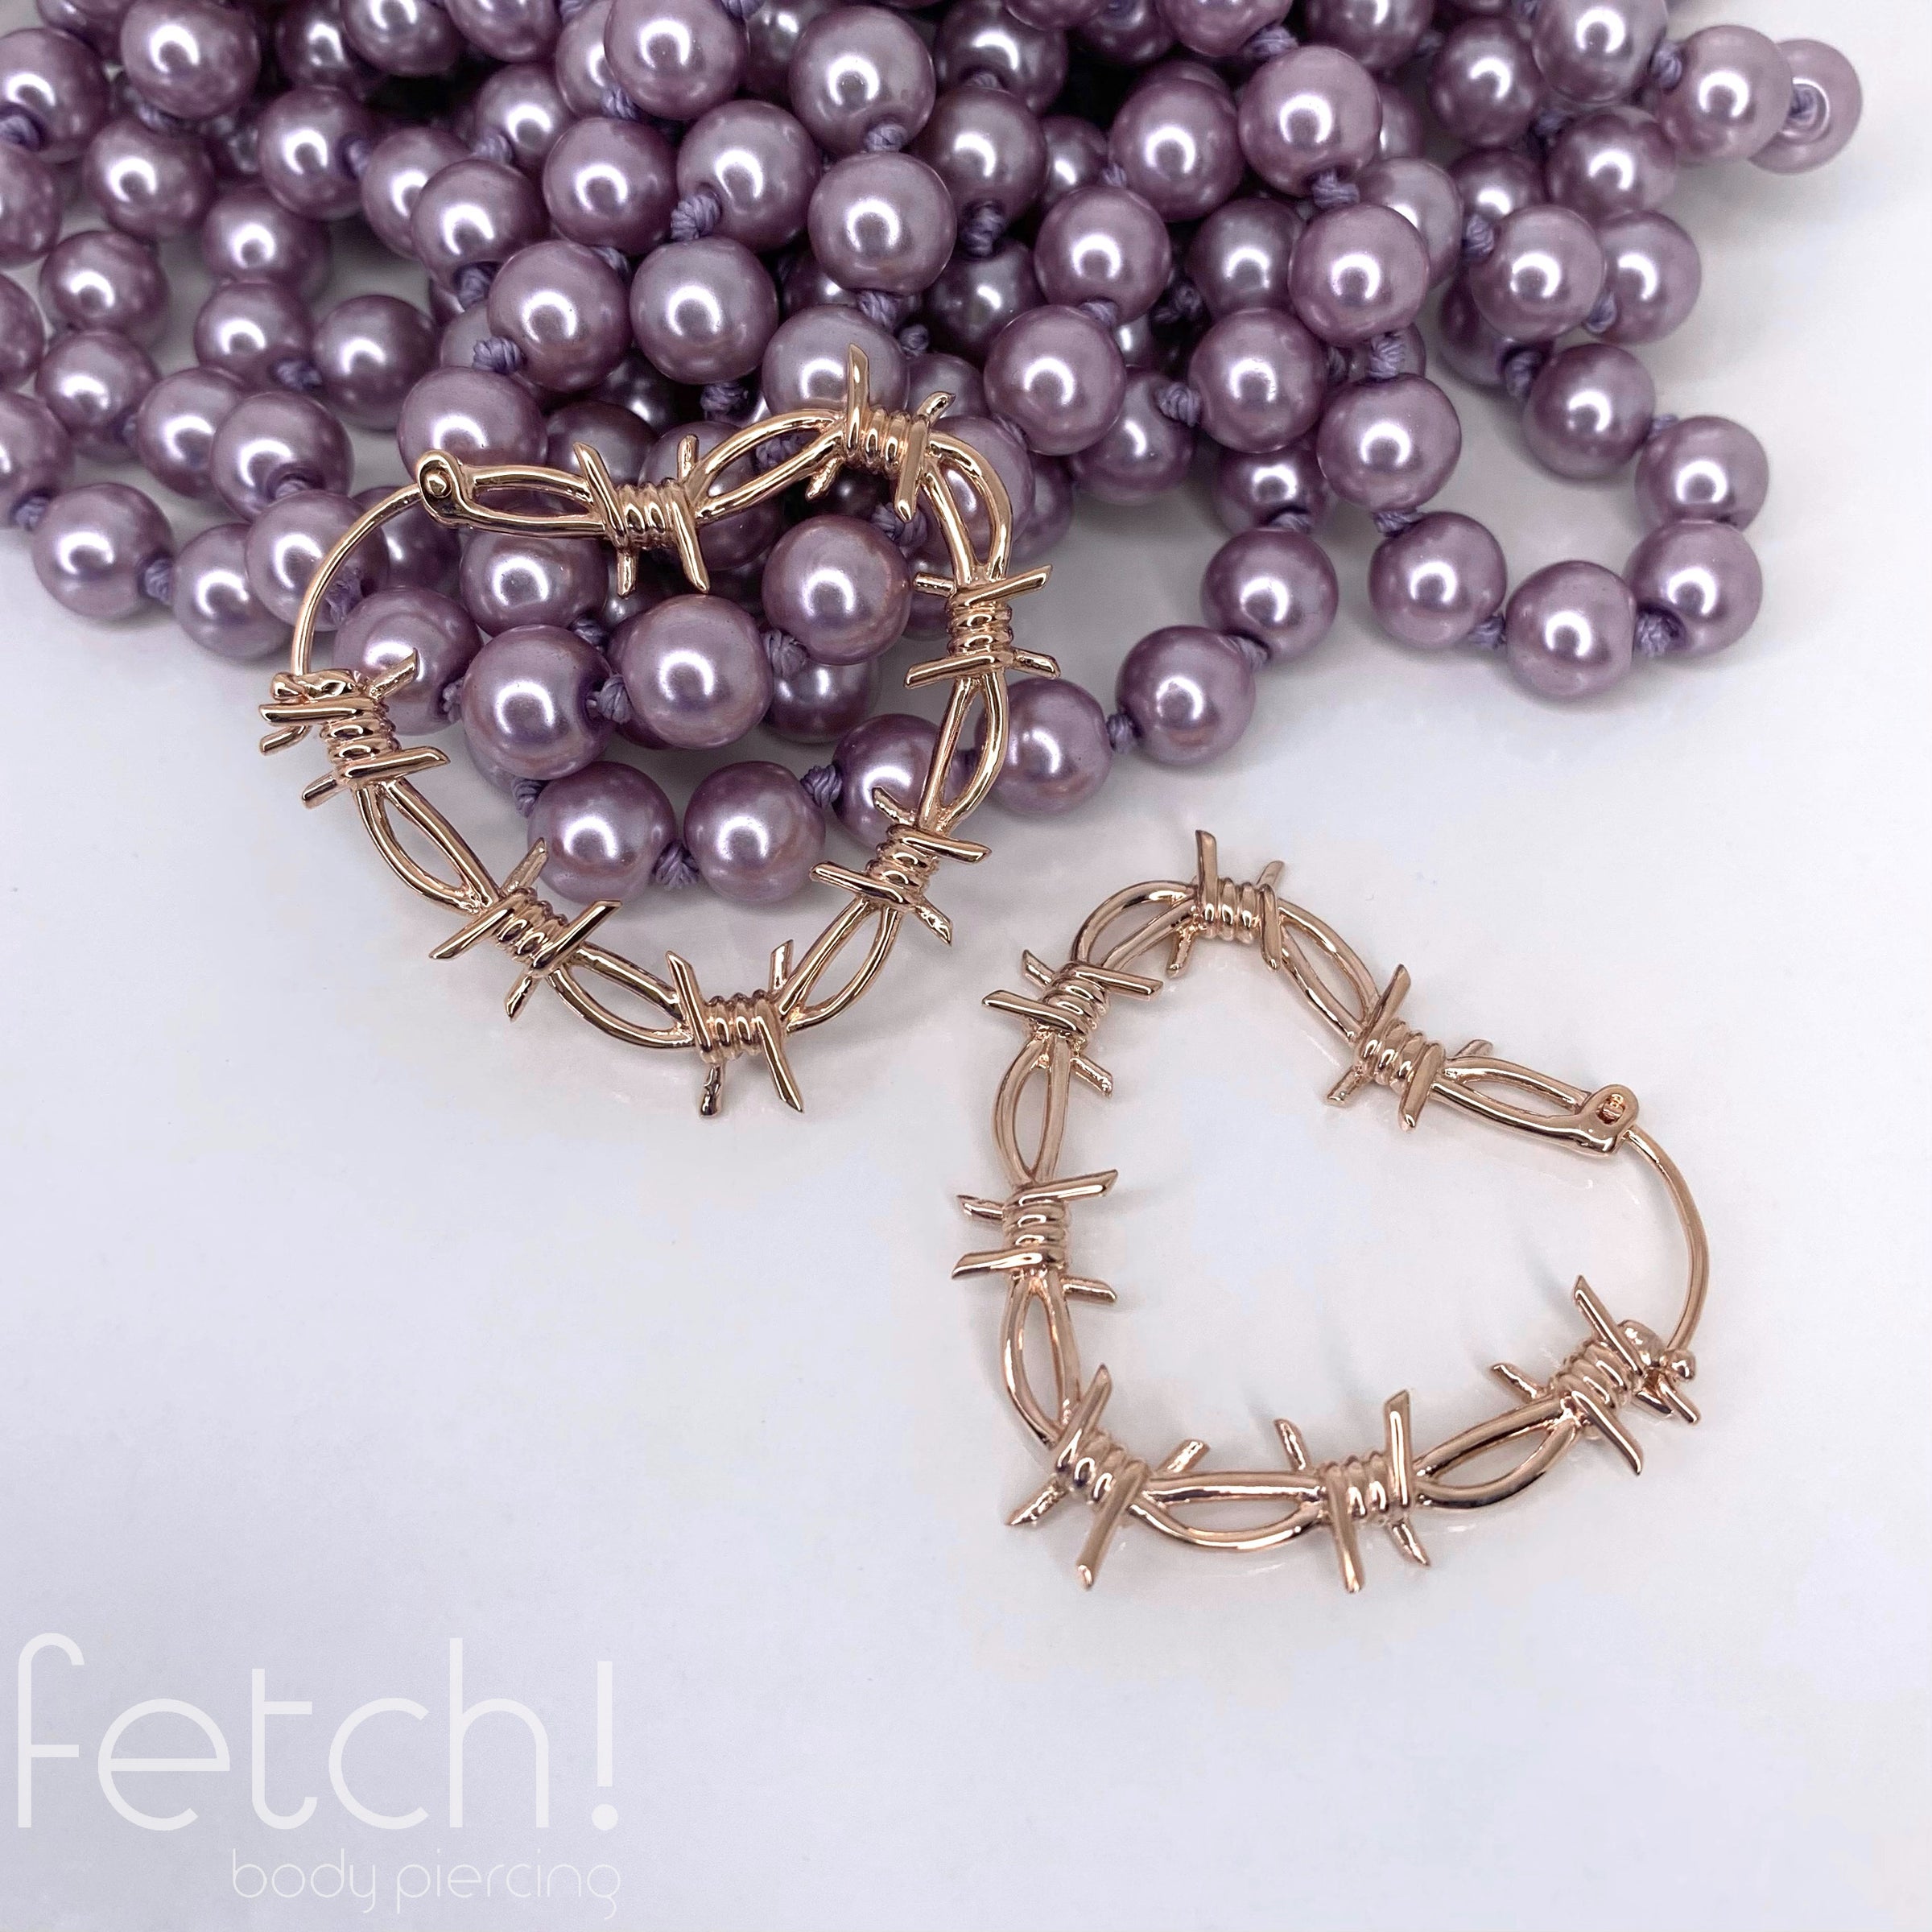 Faceted Bead Threader by Hialeah Fine Jewelry